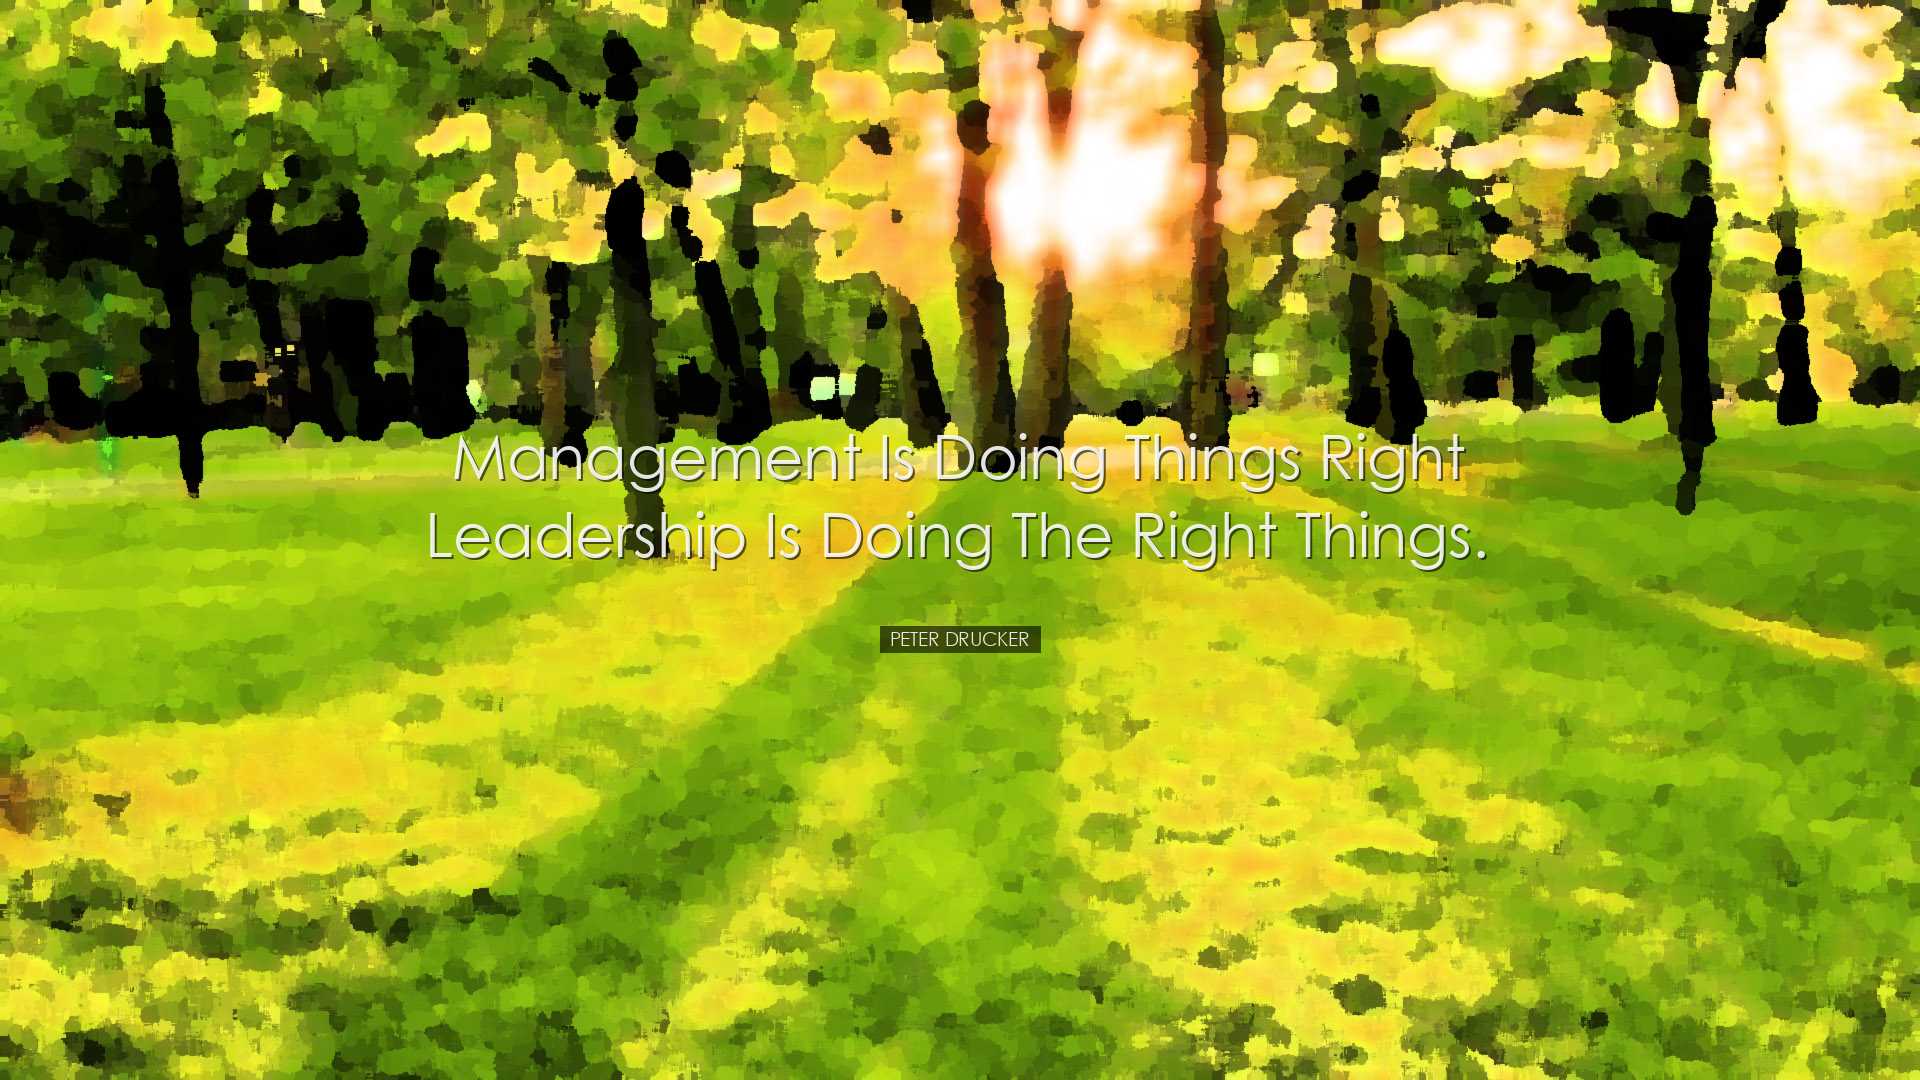 Management is doing things right leadership is doing the right thi